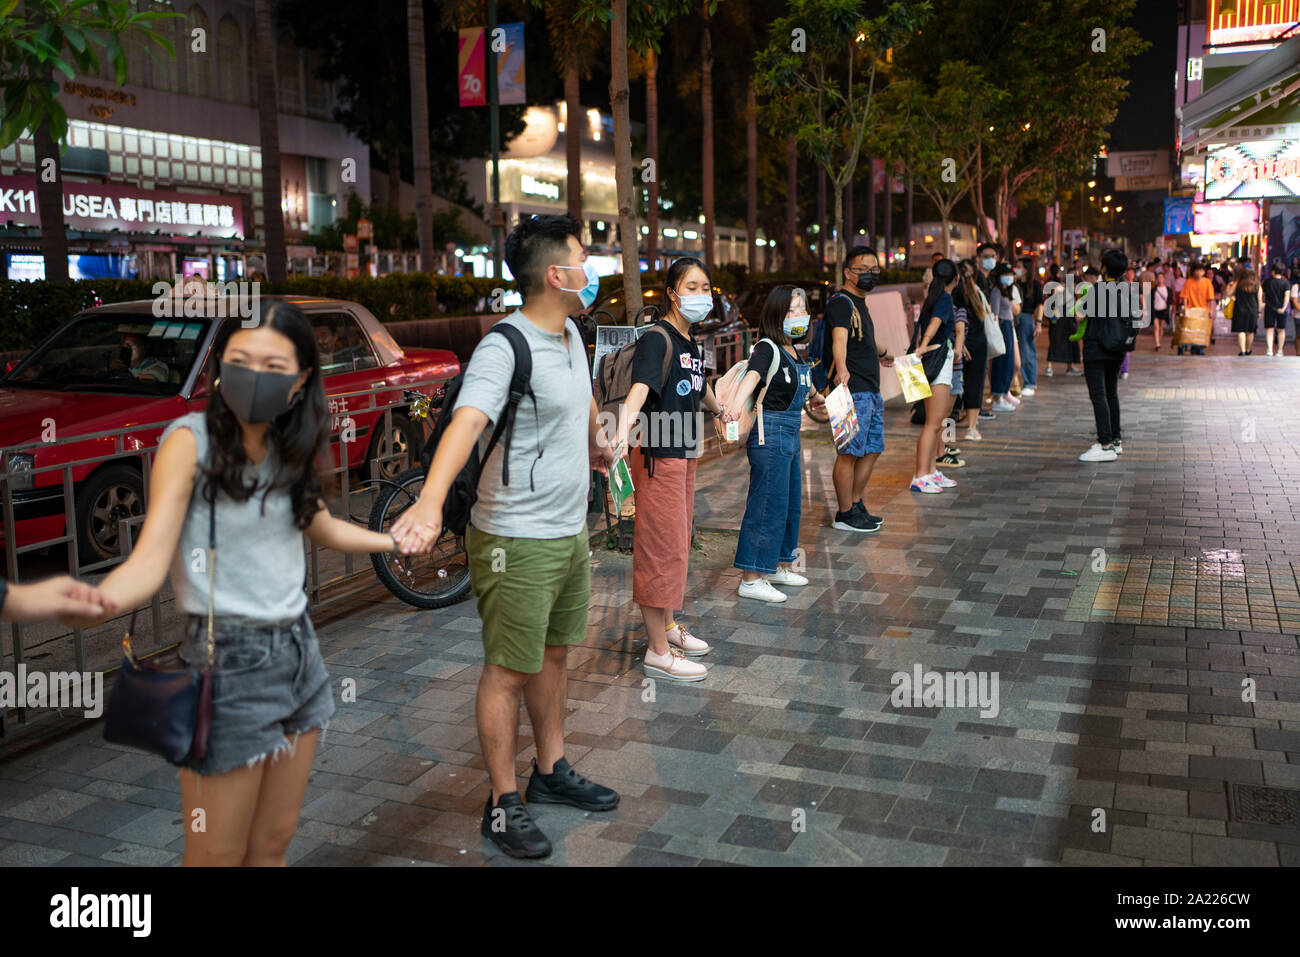 Hong Kong. 30 September, 2019. Peaceful protest held in Tsim Sha Tsui district of Kowloon tonight. Using the frog Pepe, which is a symbol of the pro-democracy movement in the city, protestors formed a human chain stretching along busy Nathan Road.  Iain Masterton/Alamy Live News. Stock Photo